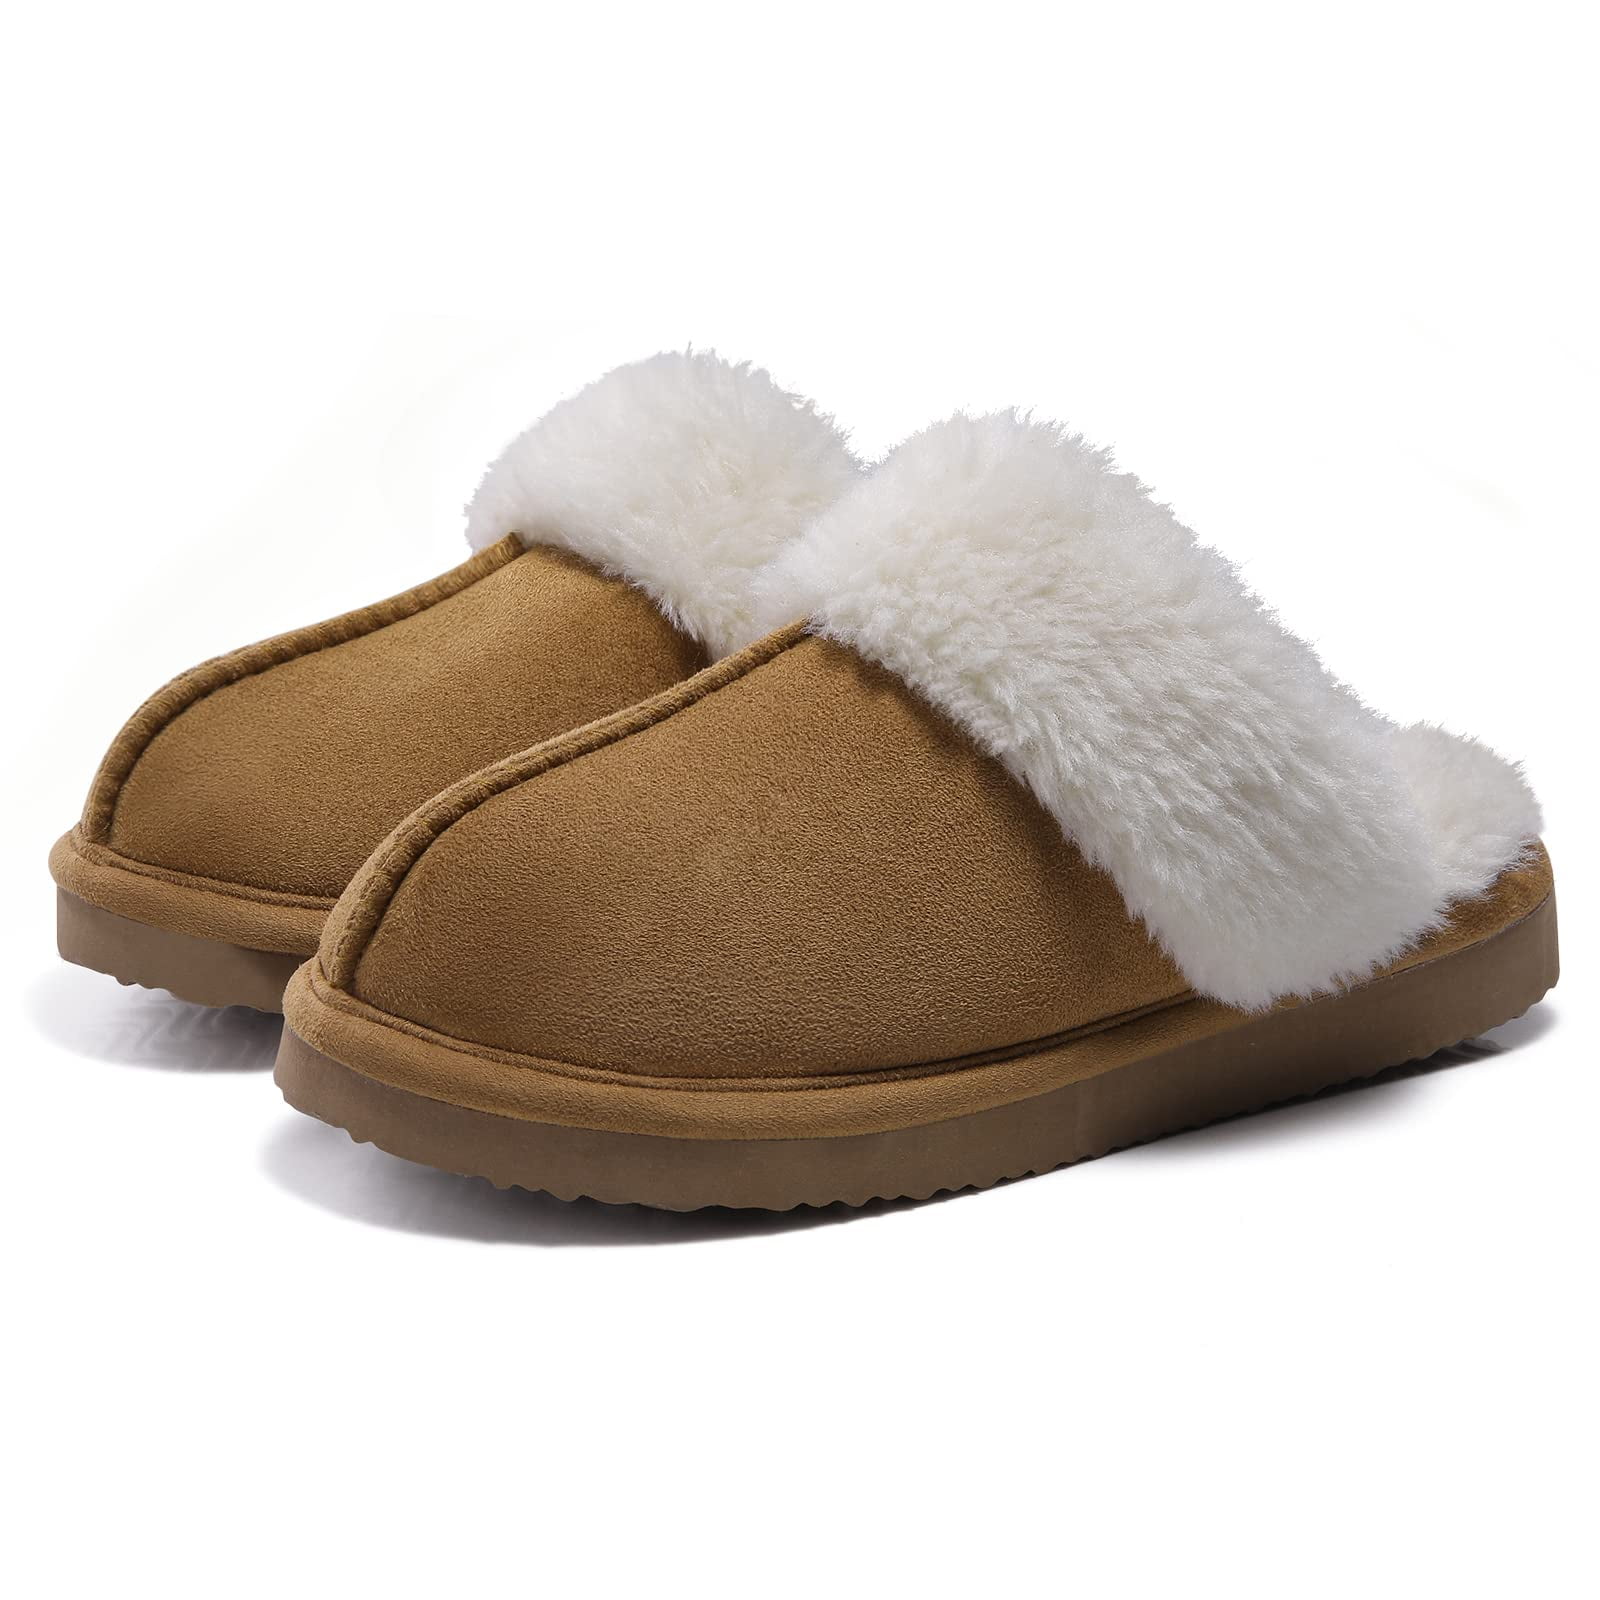 Men's Cozy Memory Foam Slippers with Fuzzy Wool-like Lining, Slip-on  Washable Indoor Outdoor House Shoes (38-39cm,Red) - Walmart.com